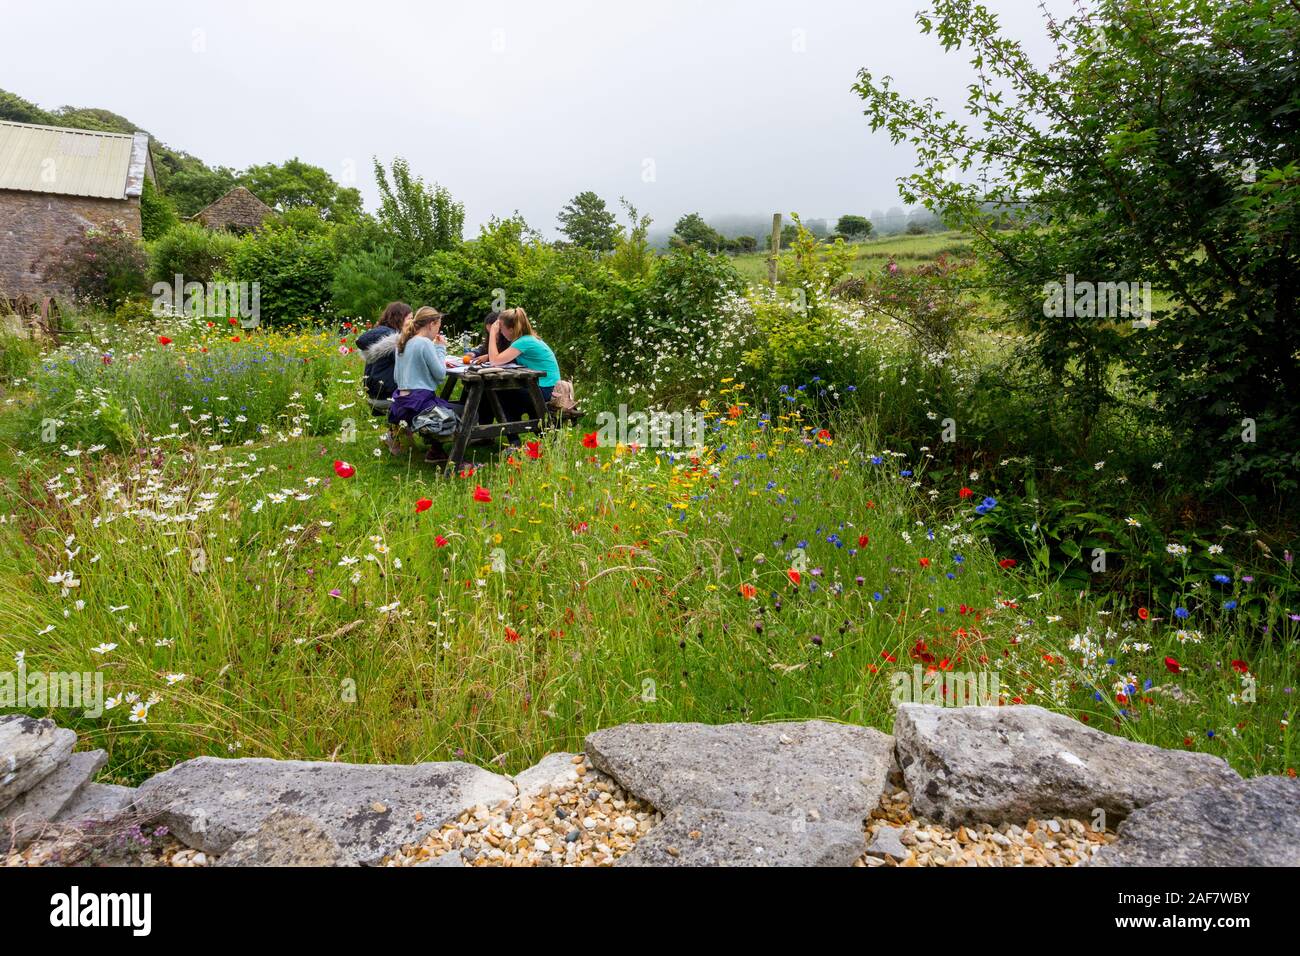 A small wild flower garden in a corner of the preserved farm in the abandoned village of Tyneham, Dorset, England, UK Stock Photo